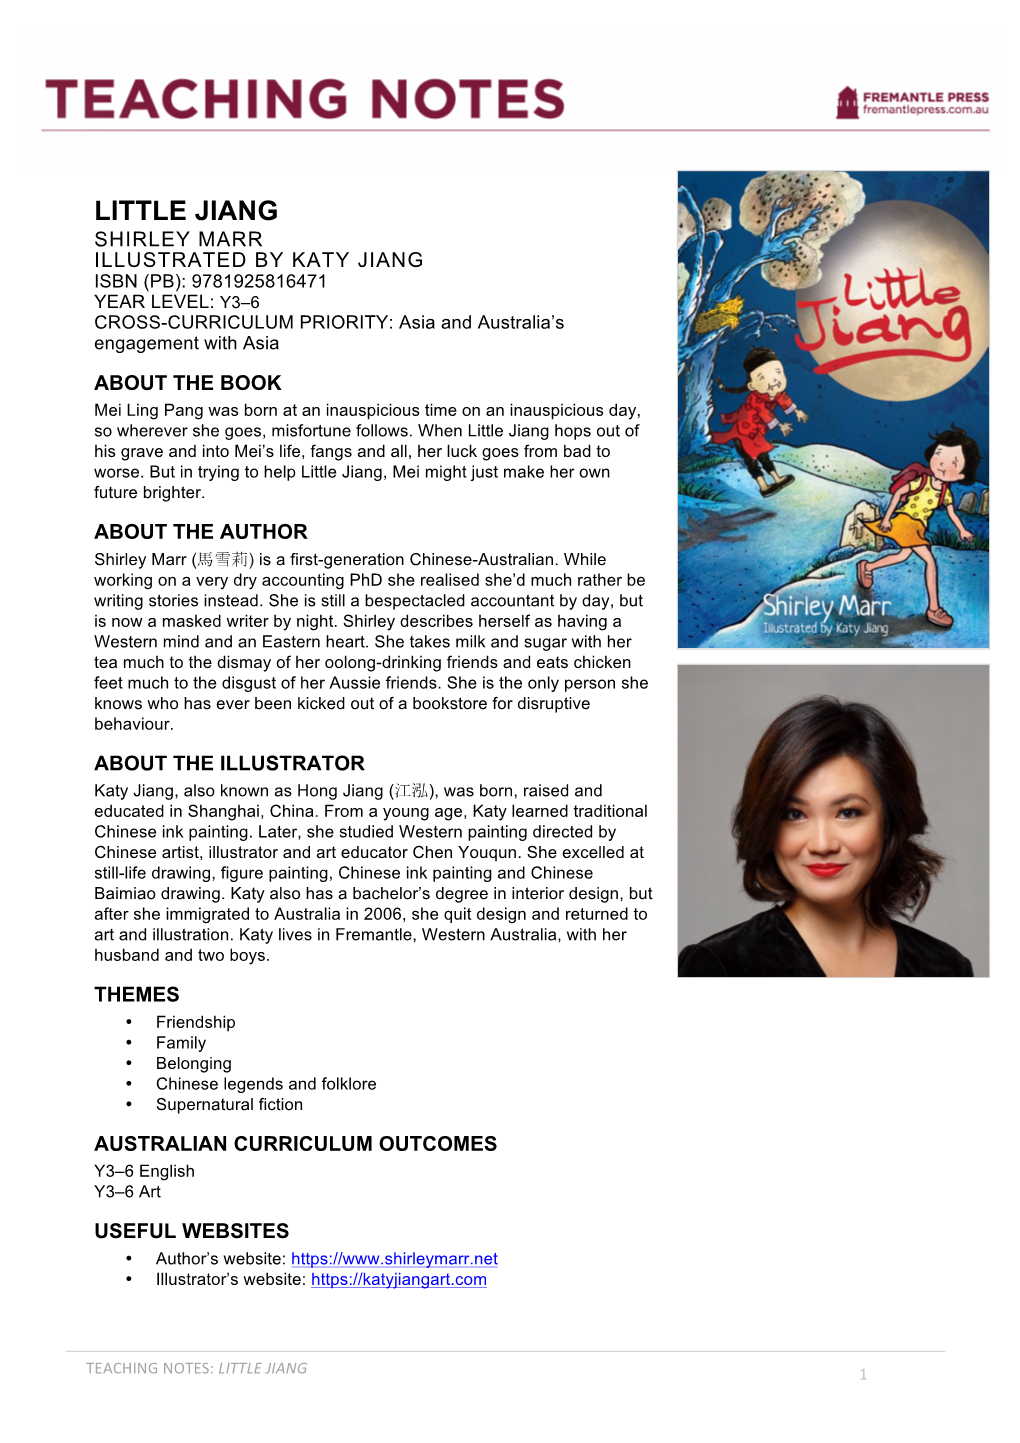 LITTLE JIANG SHIRLEY MARR ILLUSTRATED by KATY JIANG ISBN (PB): 9781925816471 YEAR LEVEL: Y3–6 CROSS-CURRICULUM PRIORITY: Asia and Australia’S Engagement with Asia